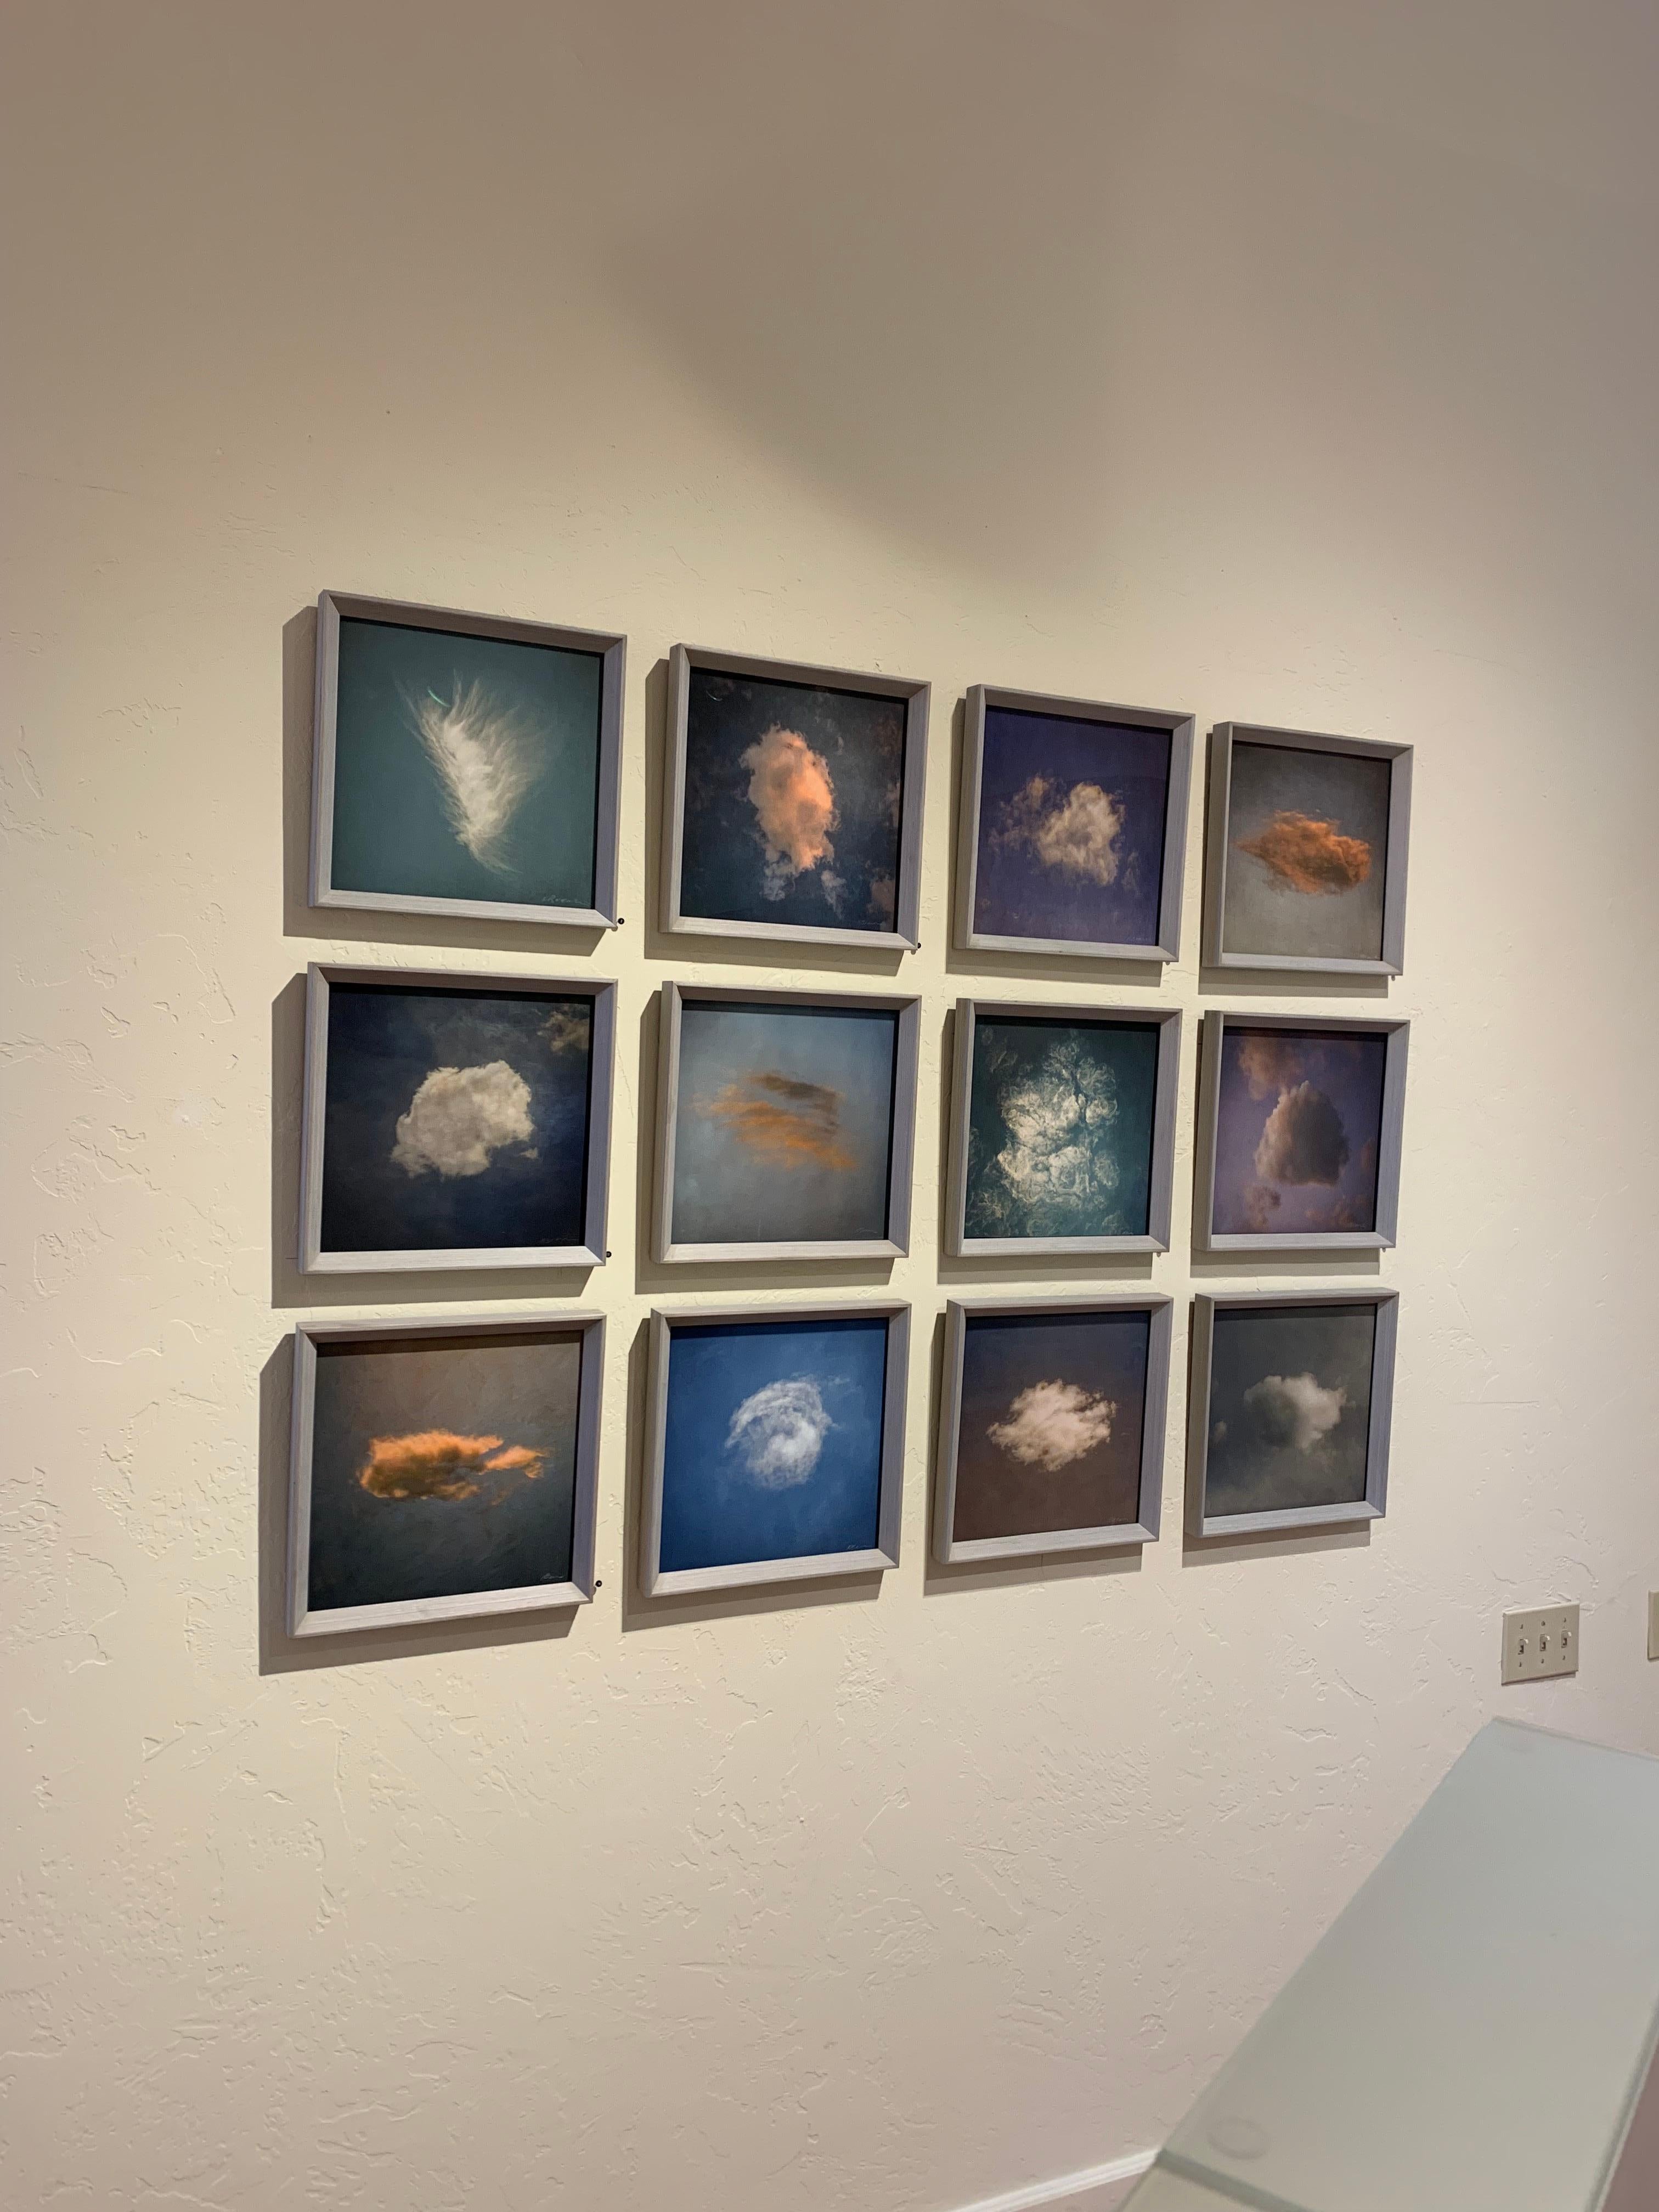 Twelve Clouds, Softly, Slowly (J) - Photograph by Kate Breakey